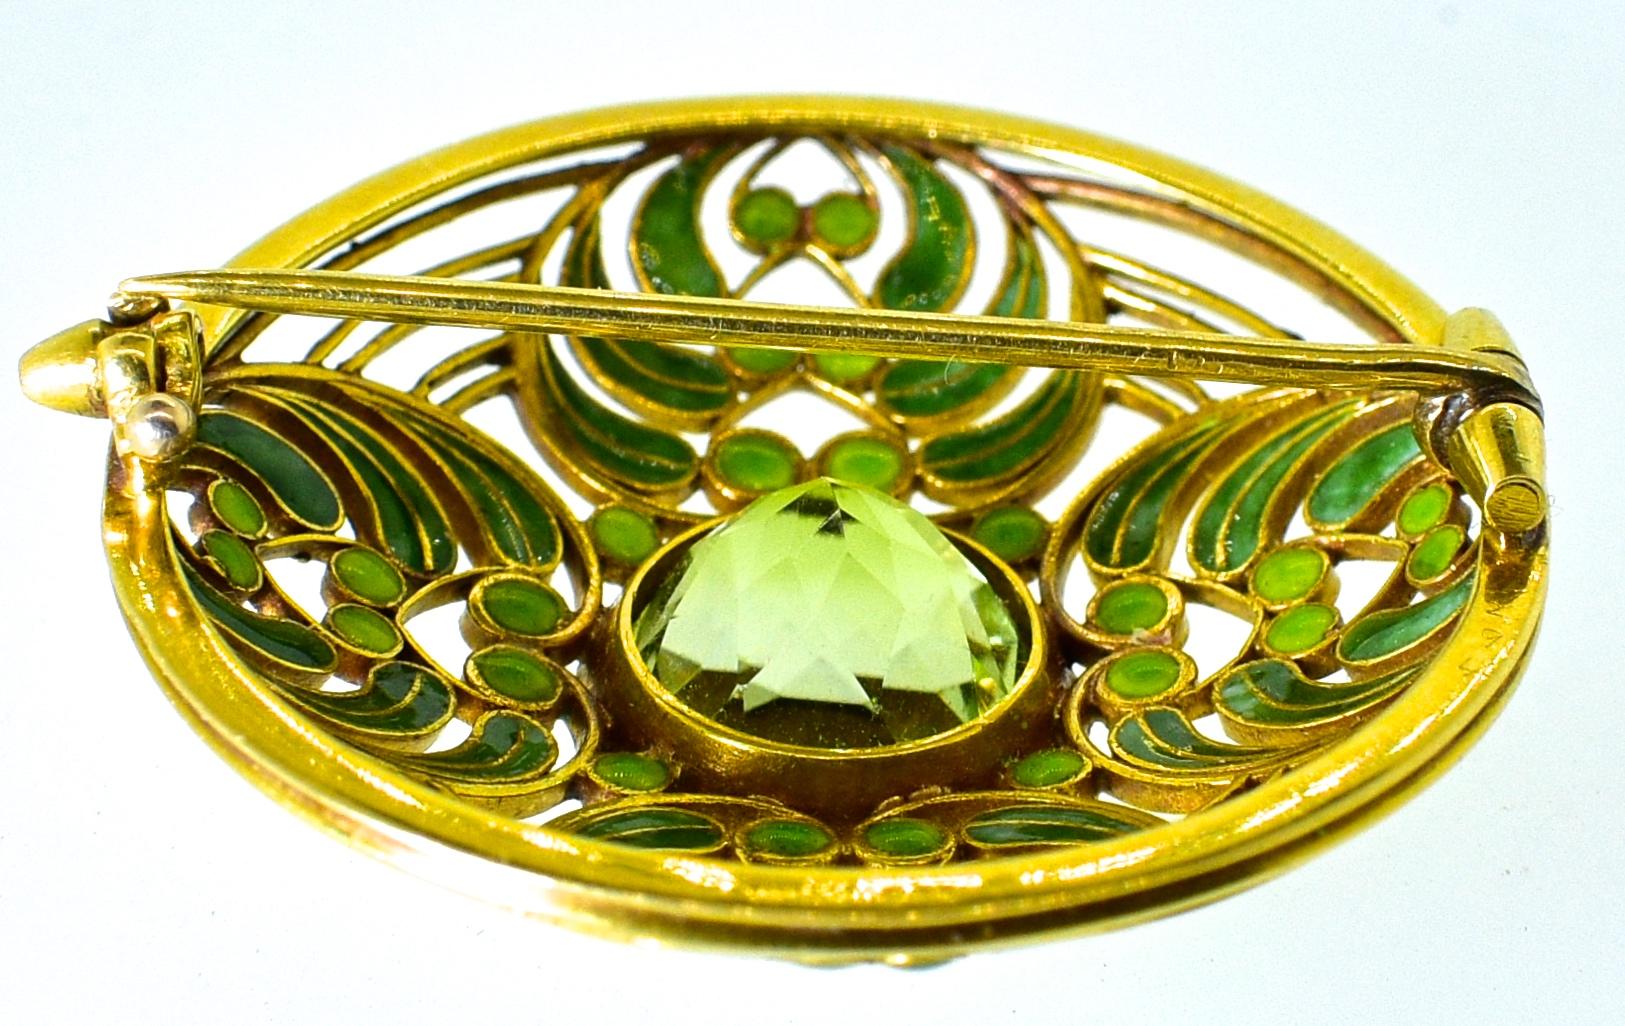 L. C. Tiffany antique brooch decorated with green enamel - on both sides - and centering a round tourmaline (or possibly Demontoid)., weighing over 5 cts.  This 18K brooch signed Tiffany & Co., is unquestionably a masterpiece by Lois Comfort Tiffany